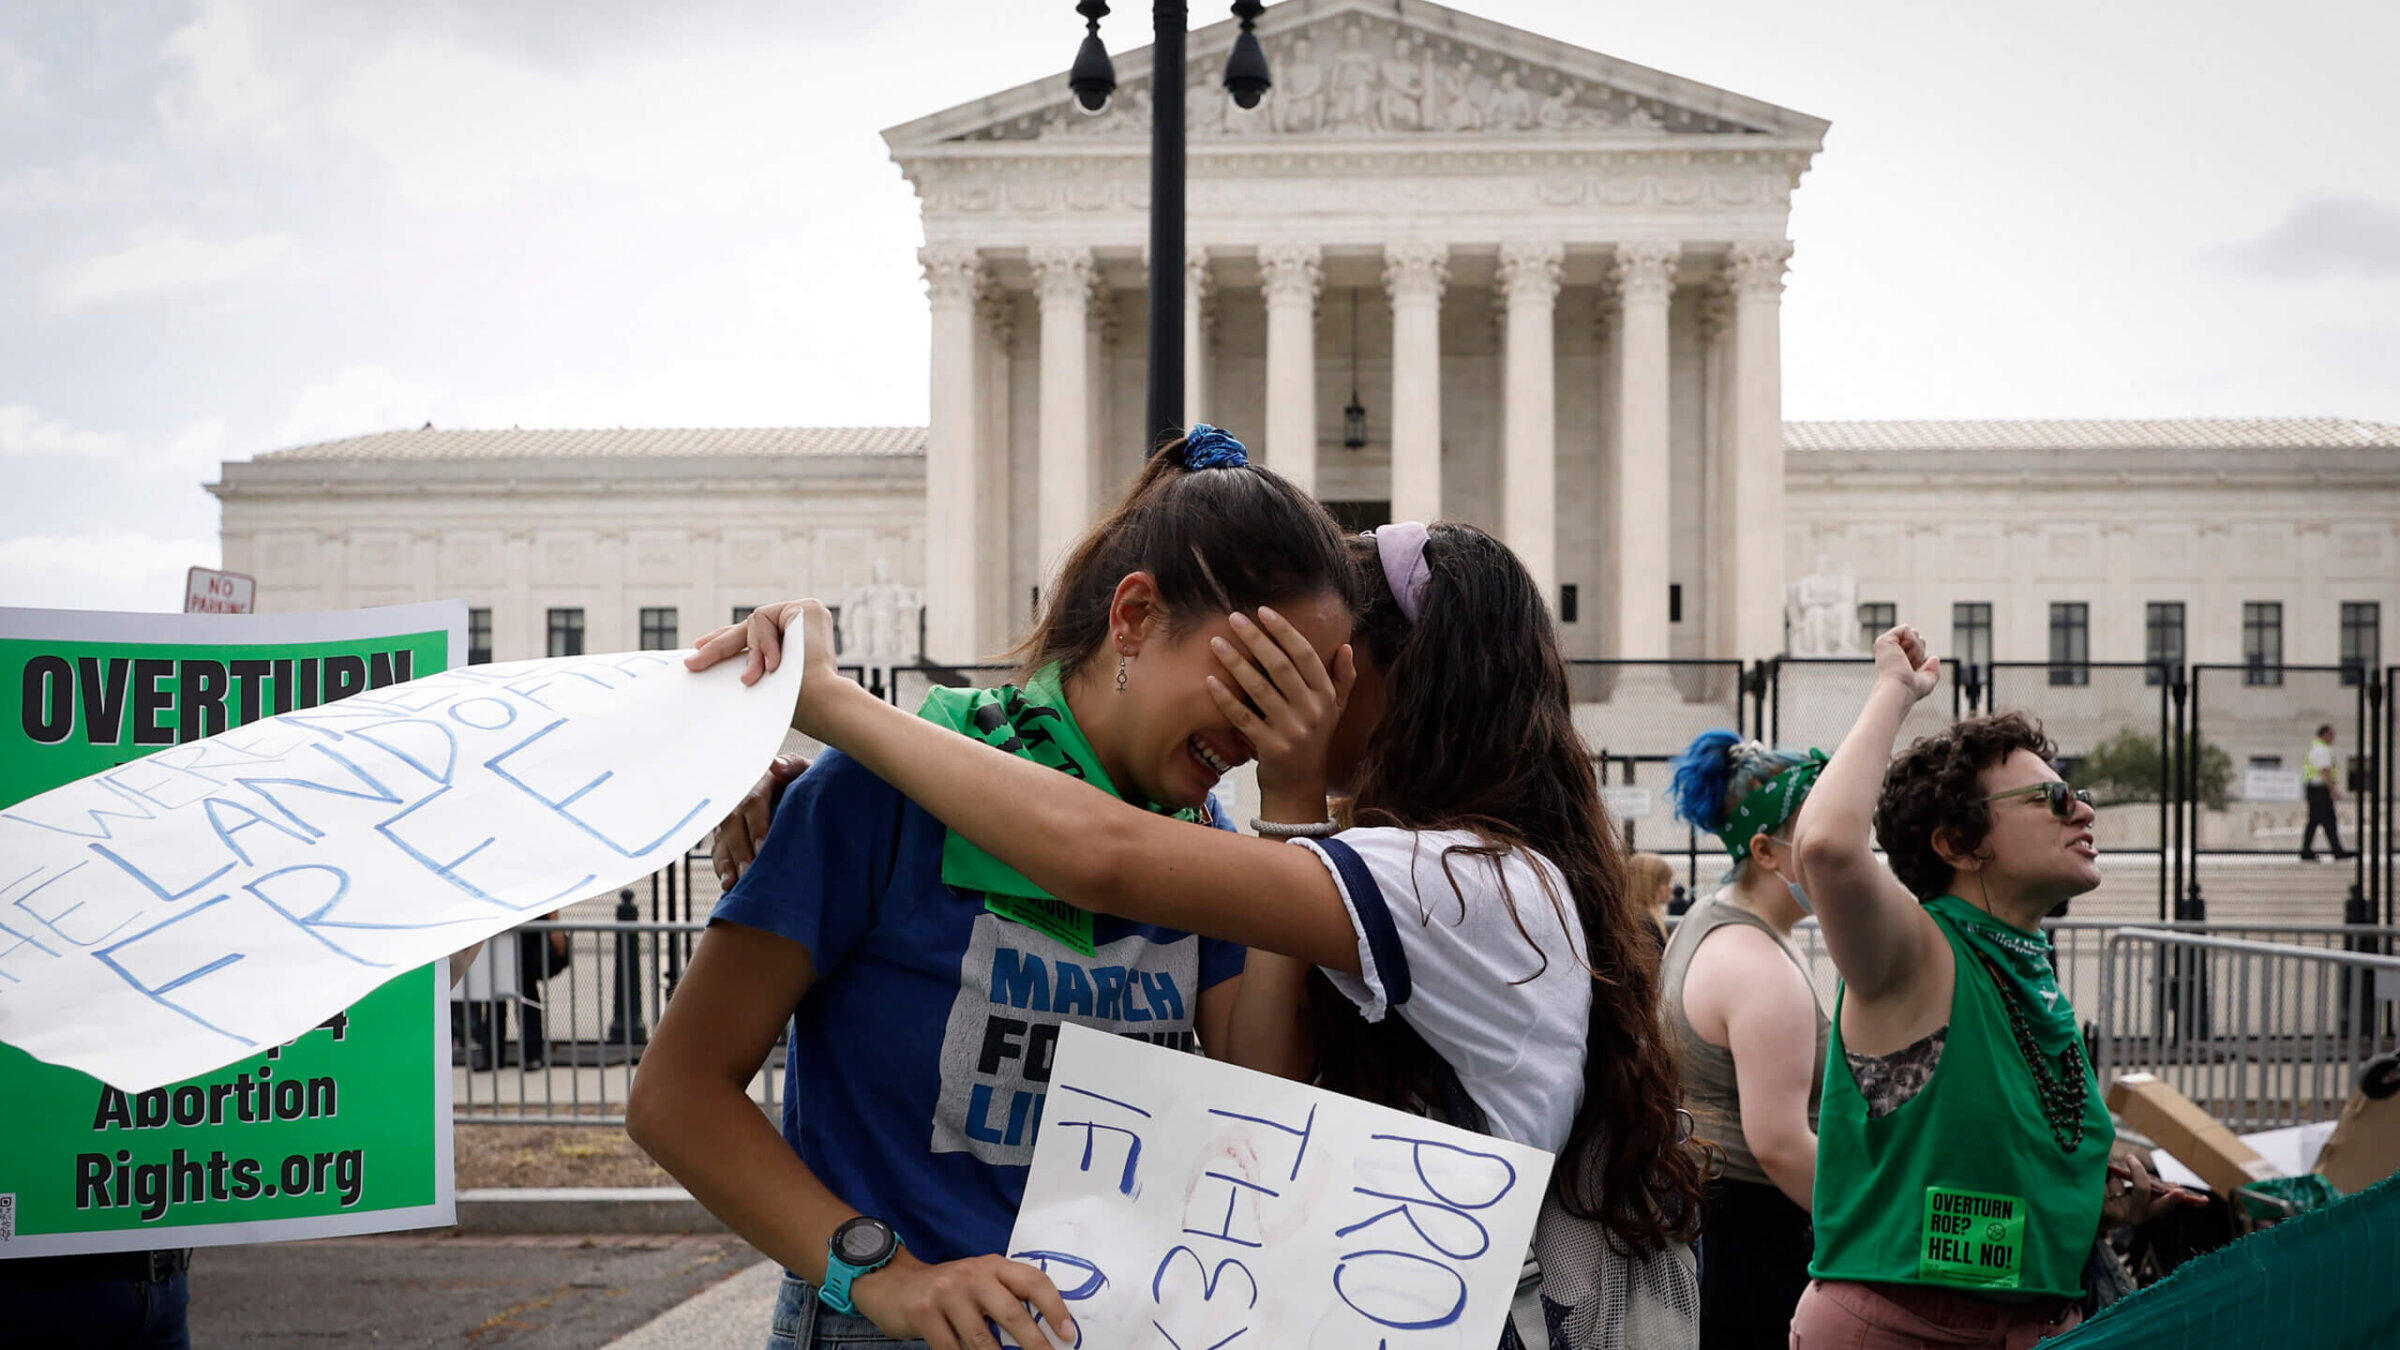 Abortion rights activists Carrie McDonald  (L) and Soraya Bata react to the Dobbs v Jackson Women’s Health Organization ruling which overturns the landmark abortion Roe v. Wade case in front of the U.S. Supreme Court on June 24, 2022 in Washington, DC.   